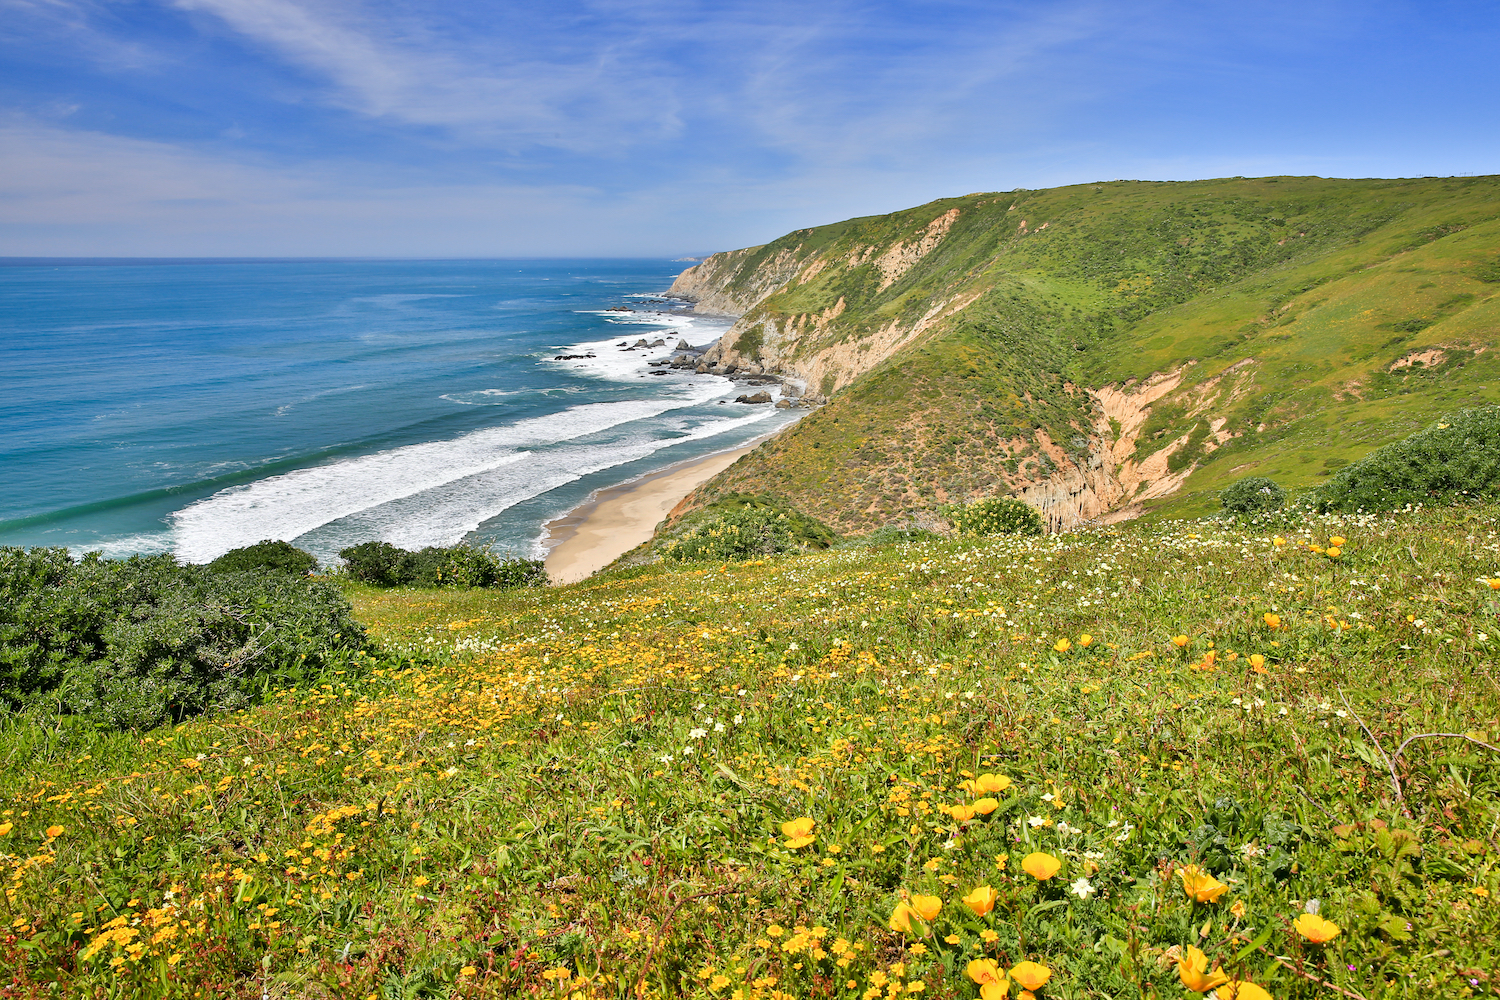 Hikers will have unobstructed Pacific Ocean views along segments of the Tomales Point Trail.